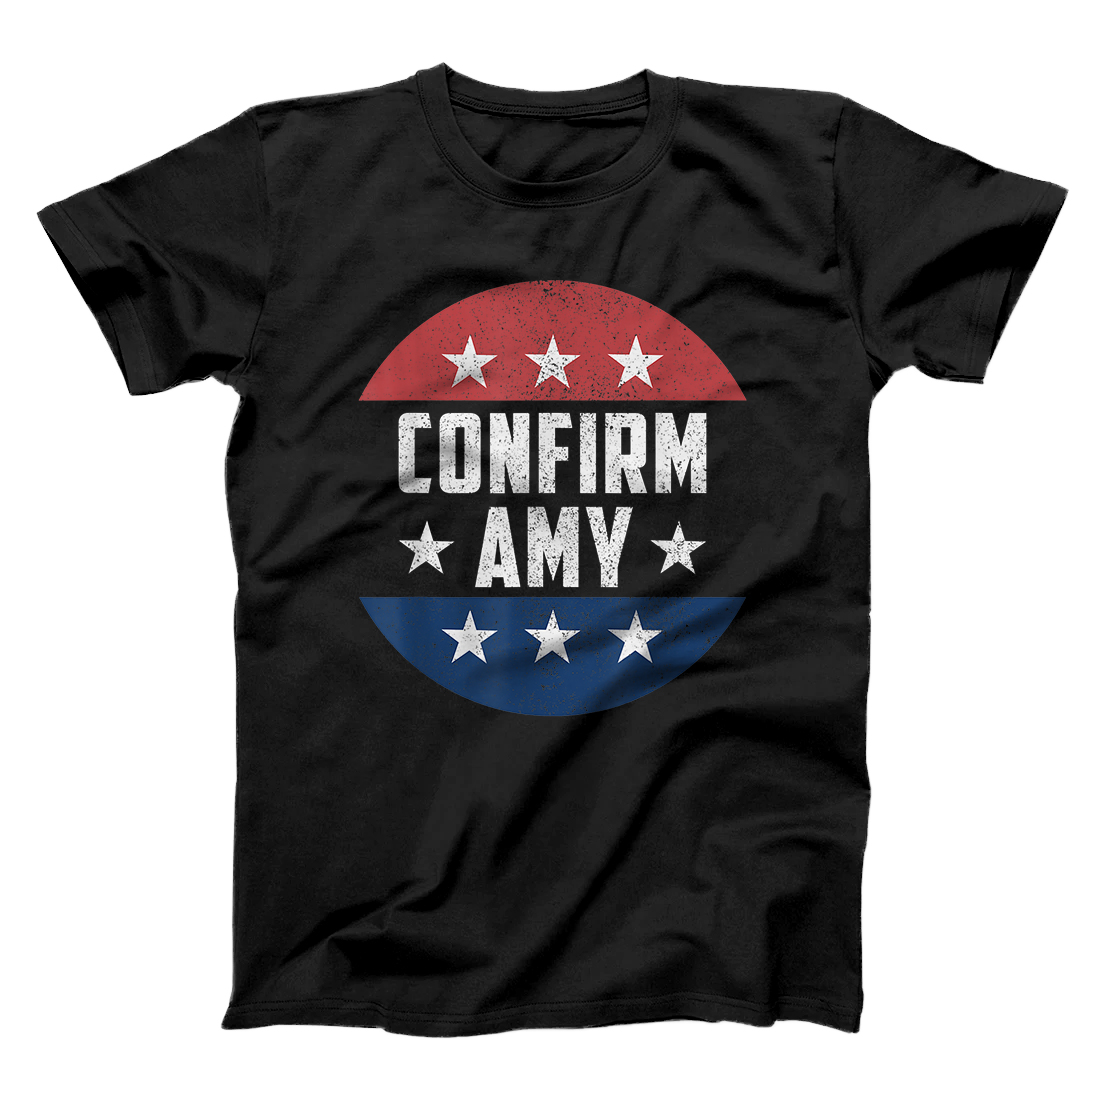 Personalized Amy Coney For SCOTUS 2020 Amy Barrett Fill That Seat T-Shirt